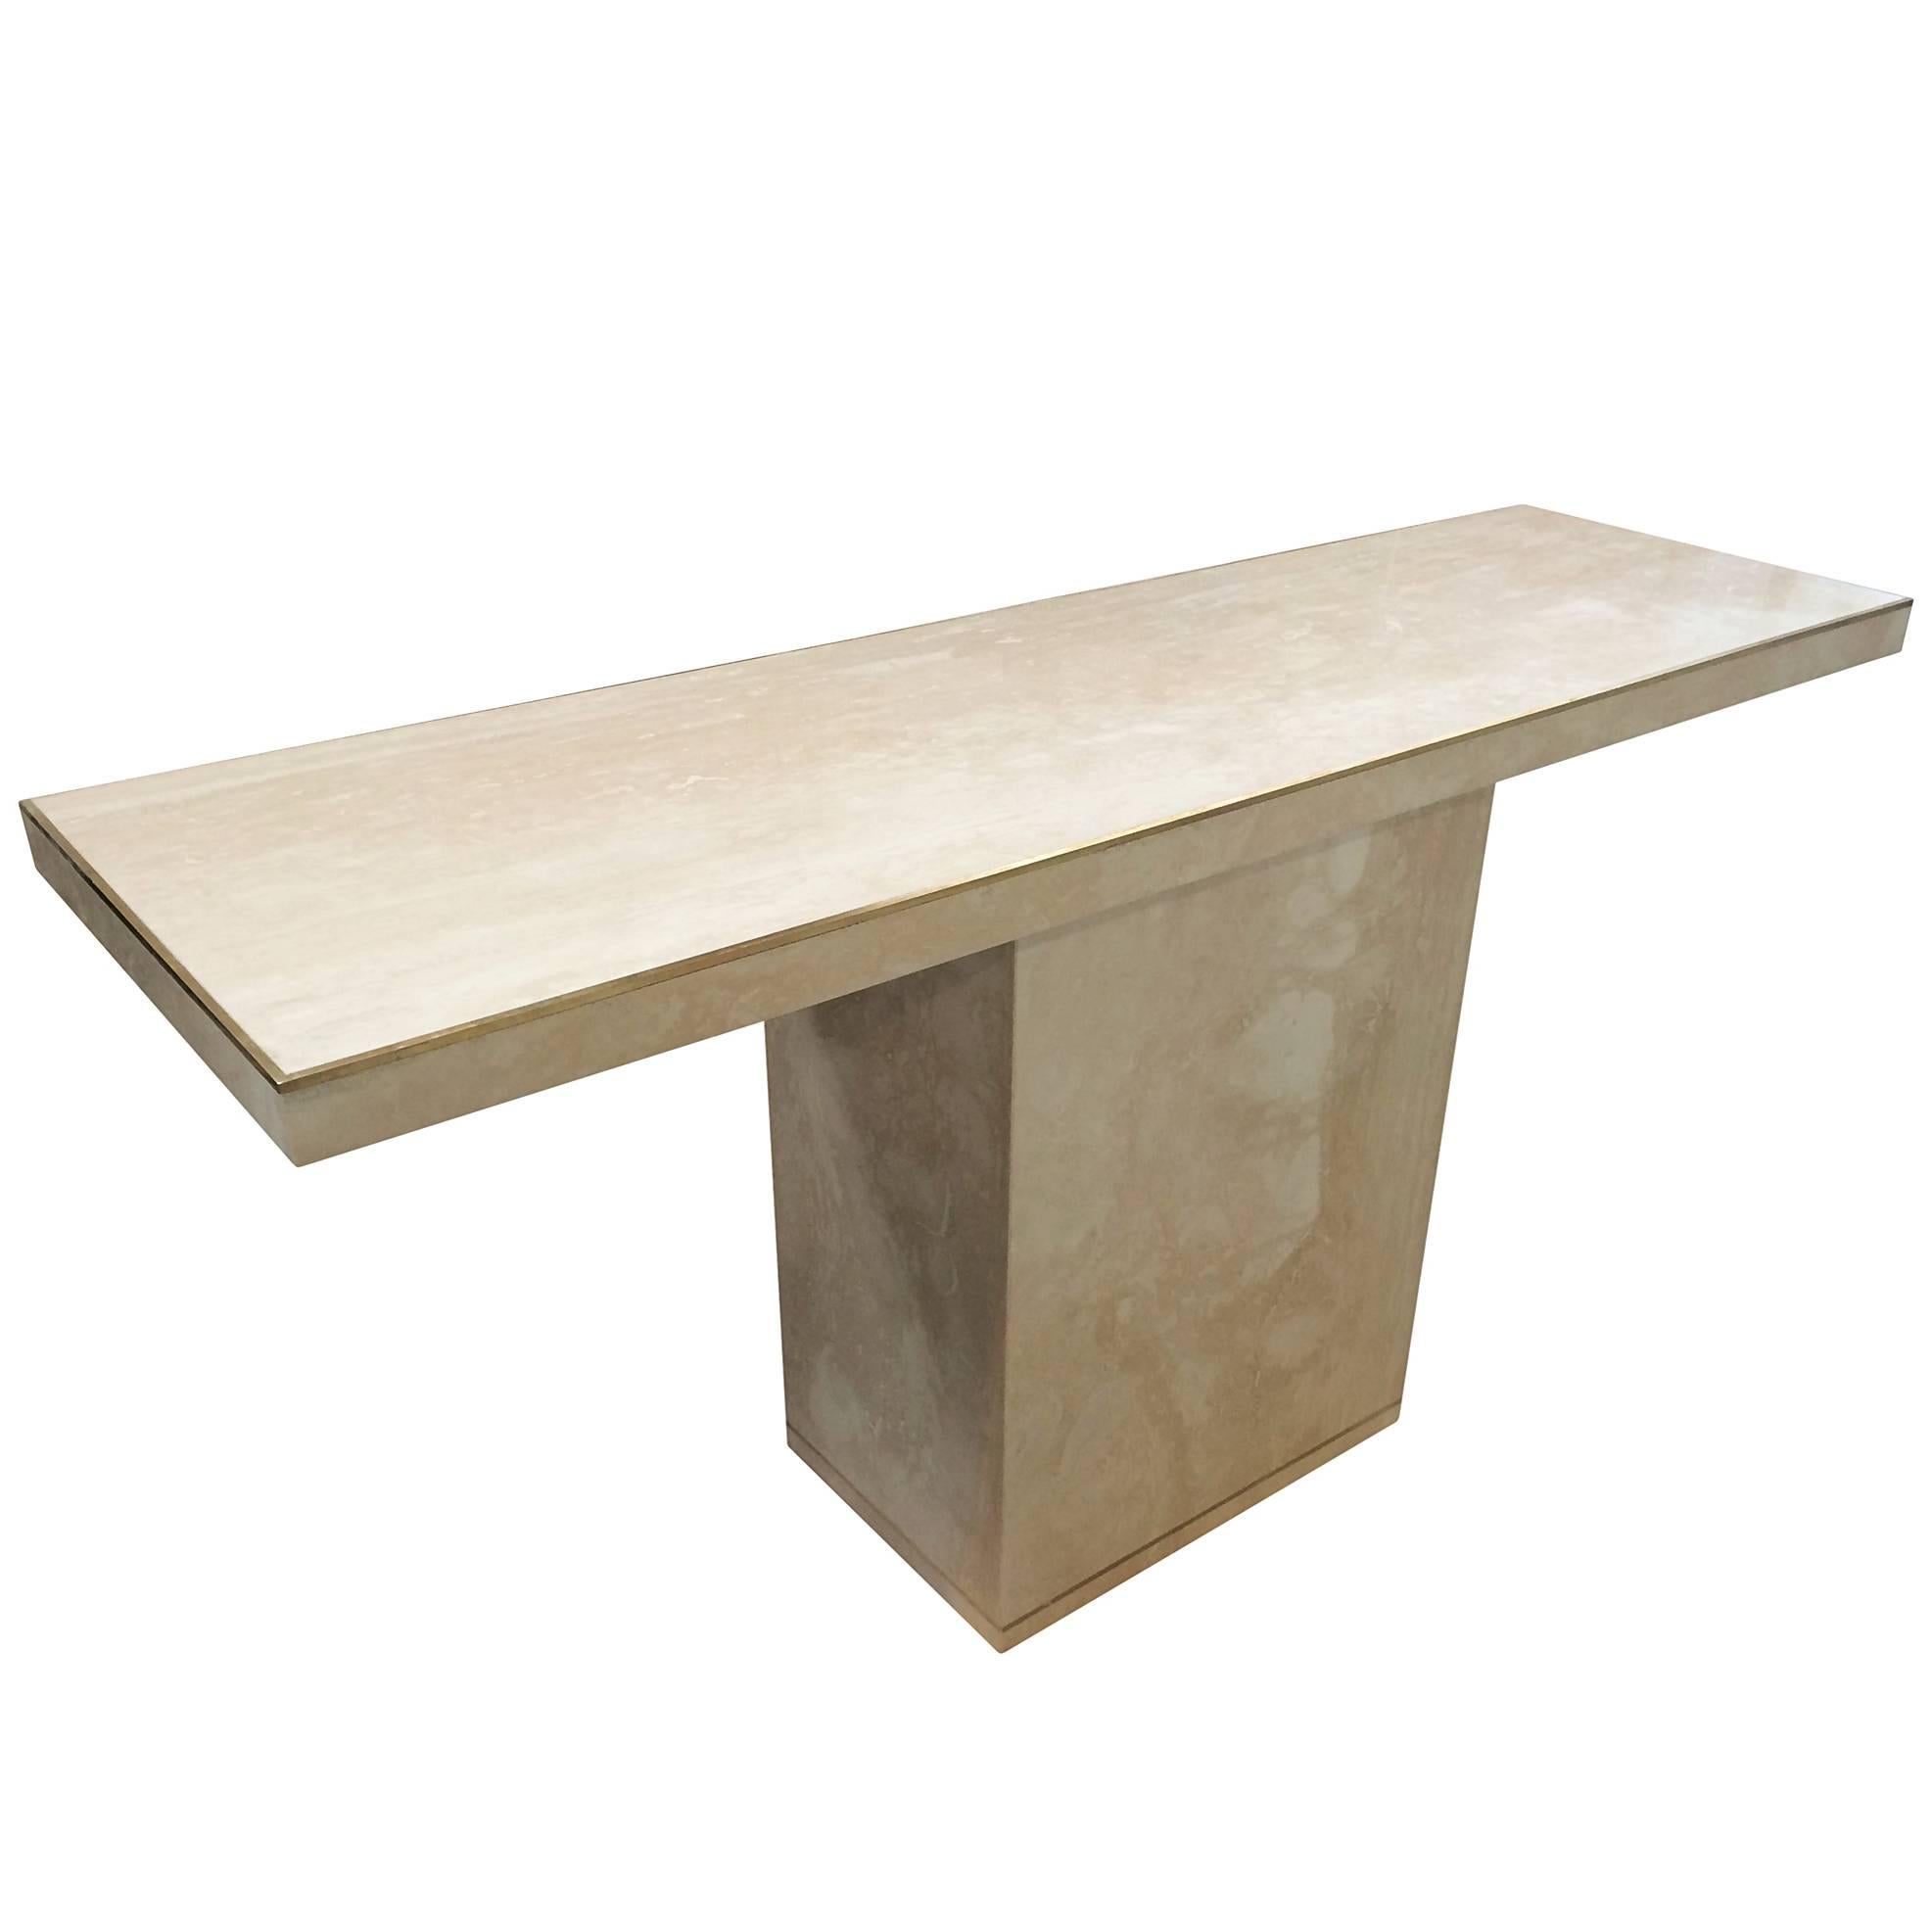 Travertine and Brass Console Table by Cain Modern